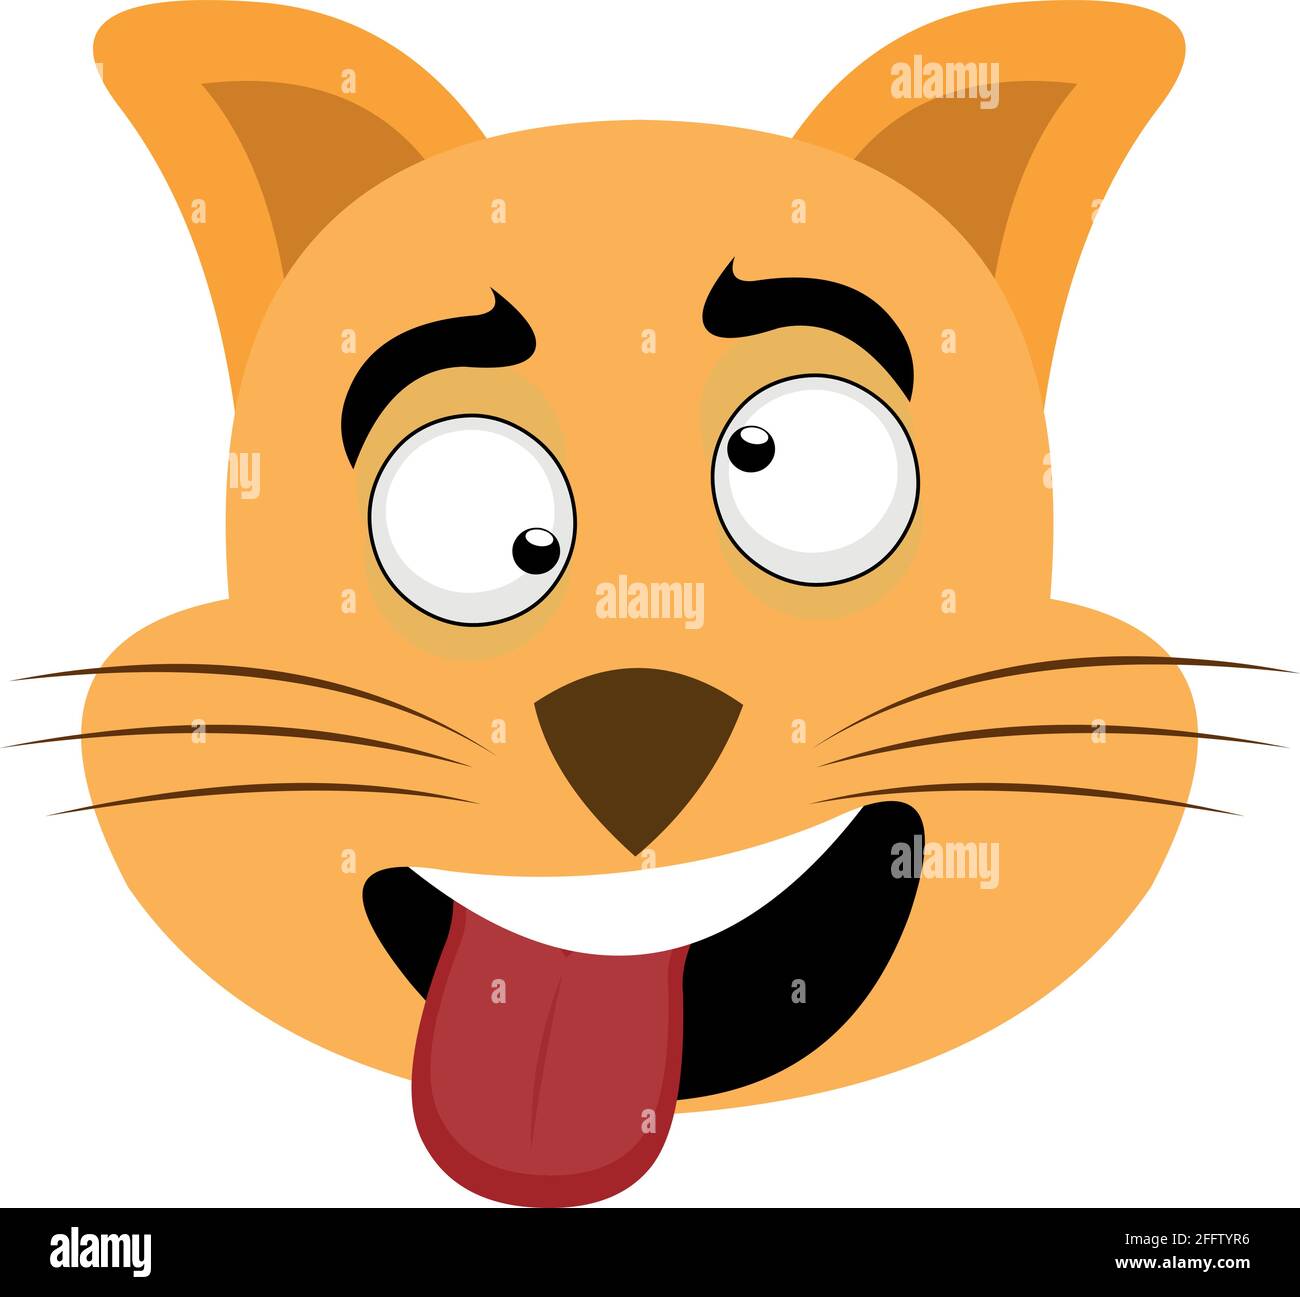 Vector illustration of the face of a cartoon cat with a crazy expression and with his tongue out Stock Vector